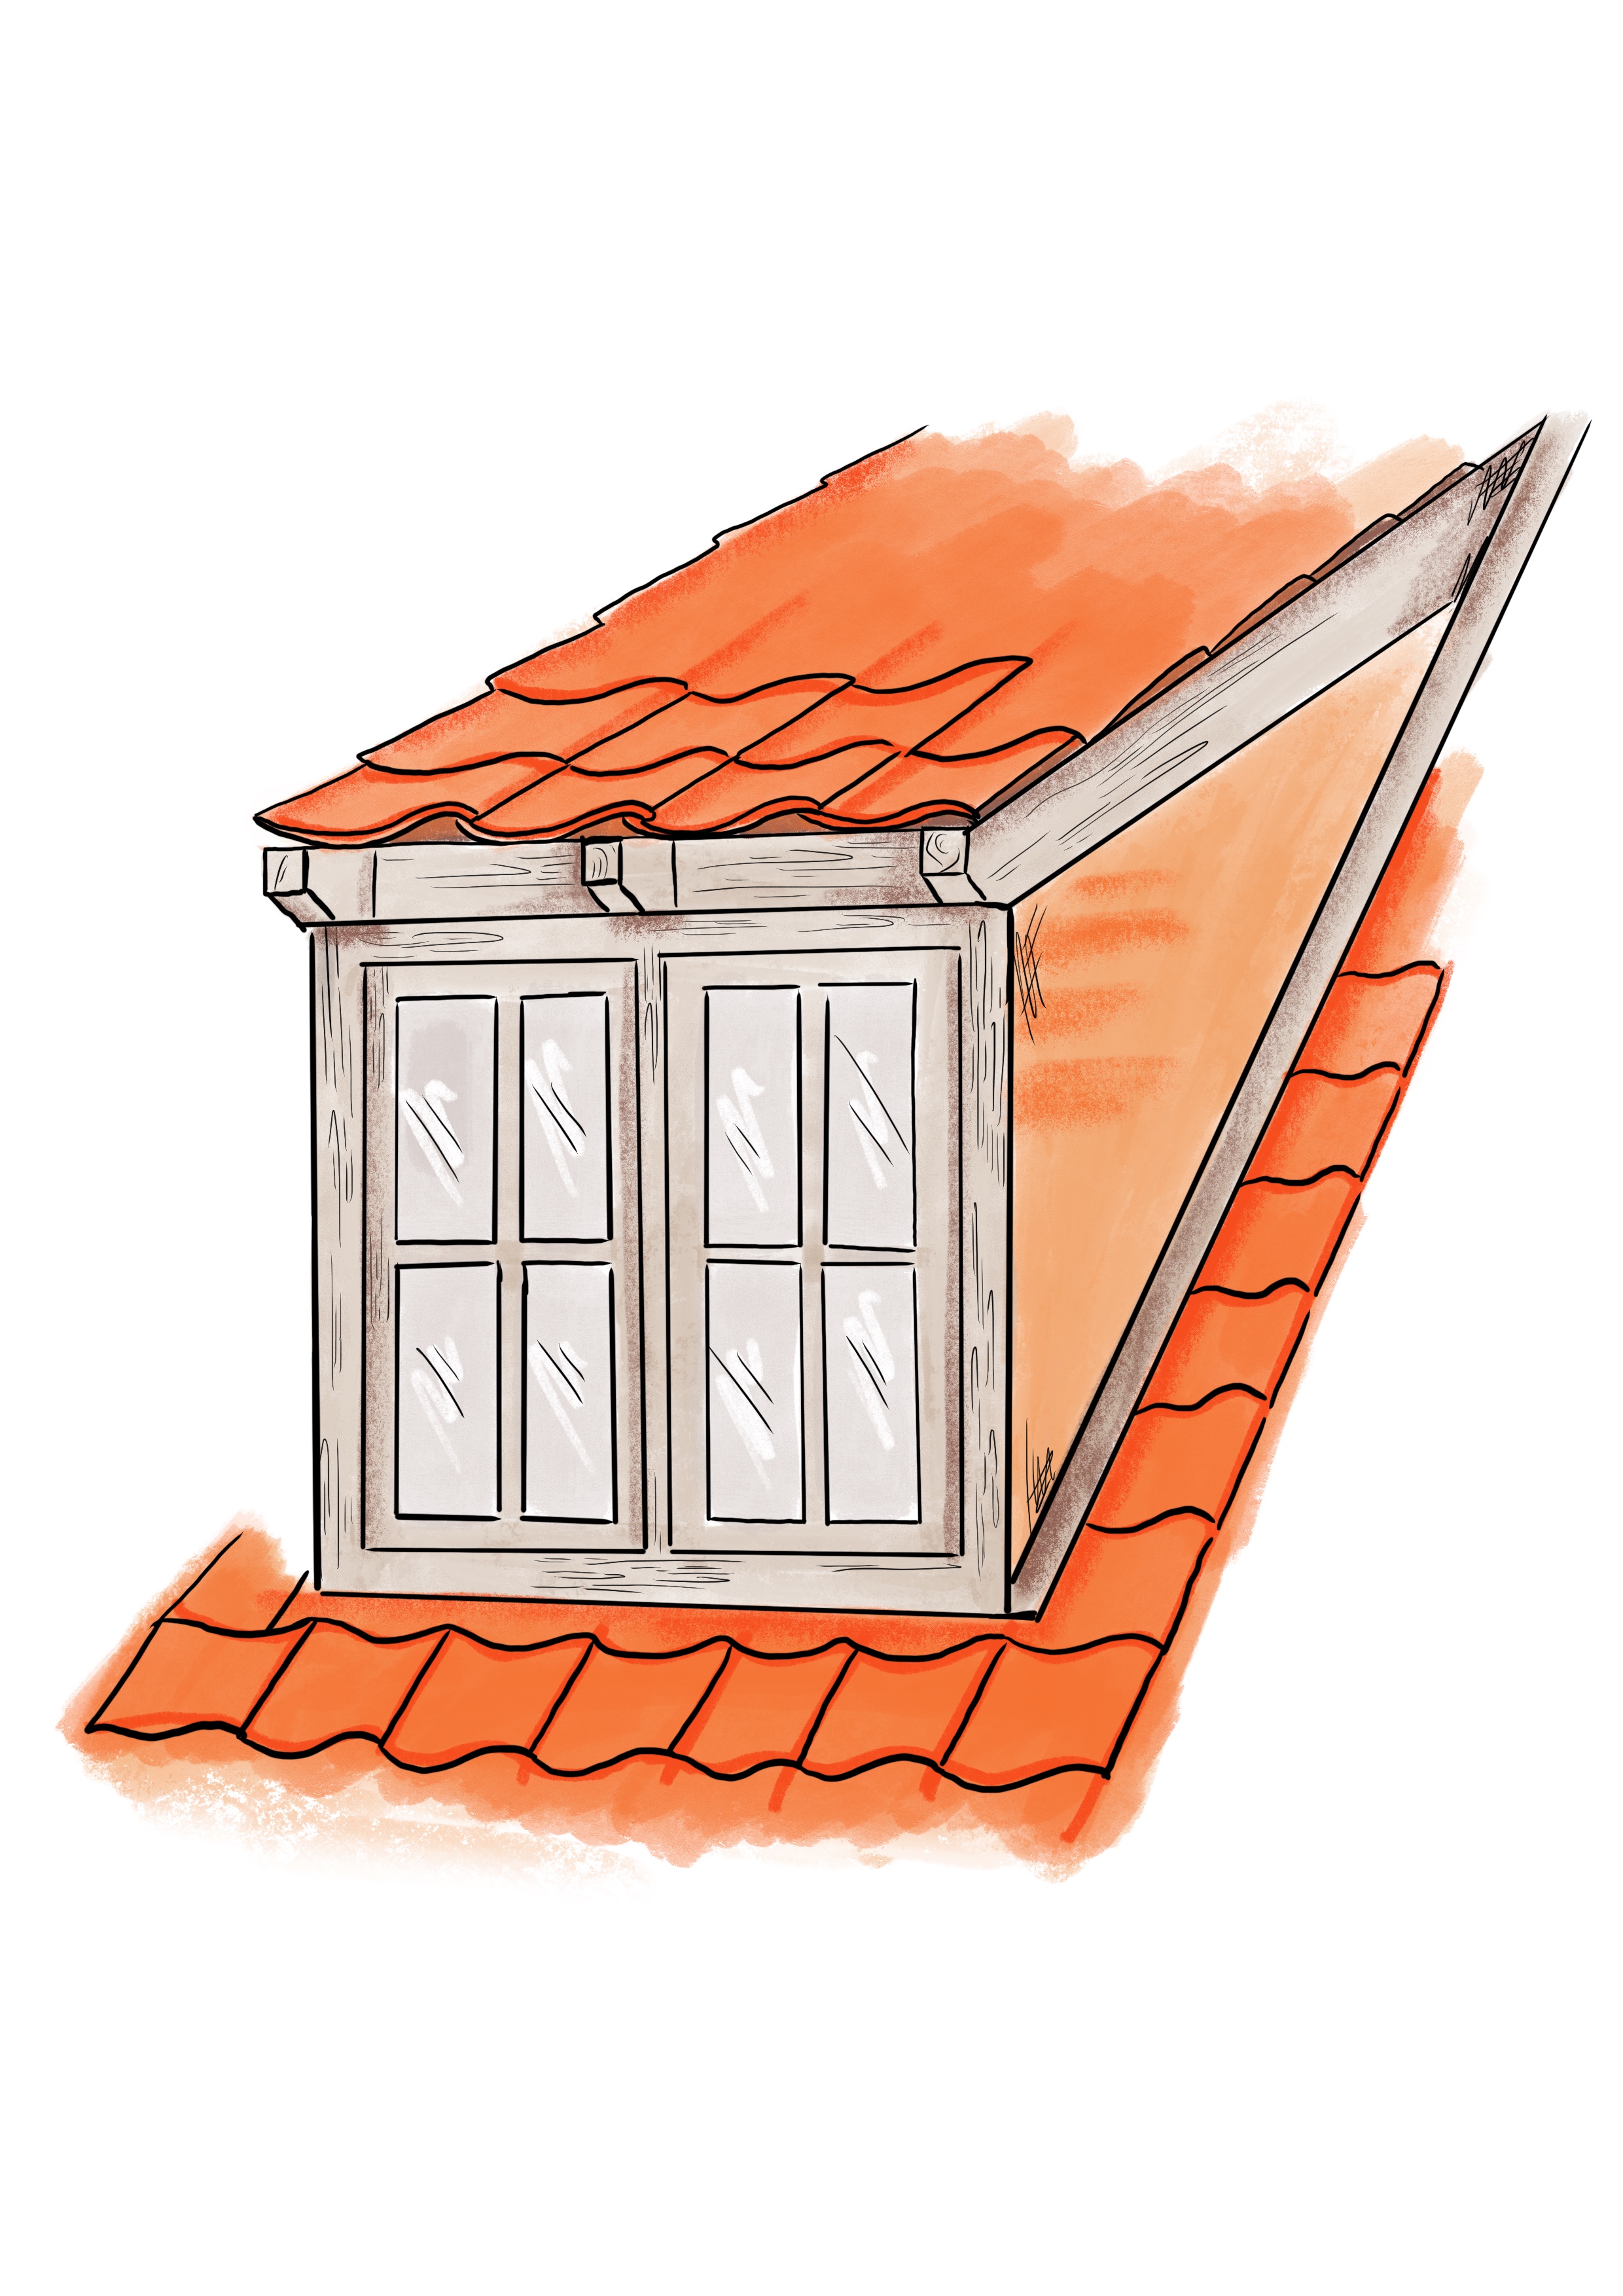 'Wedge' or 'Catslide' dormer - most typical for cottages from 18th - 20th centuries.